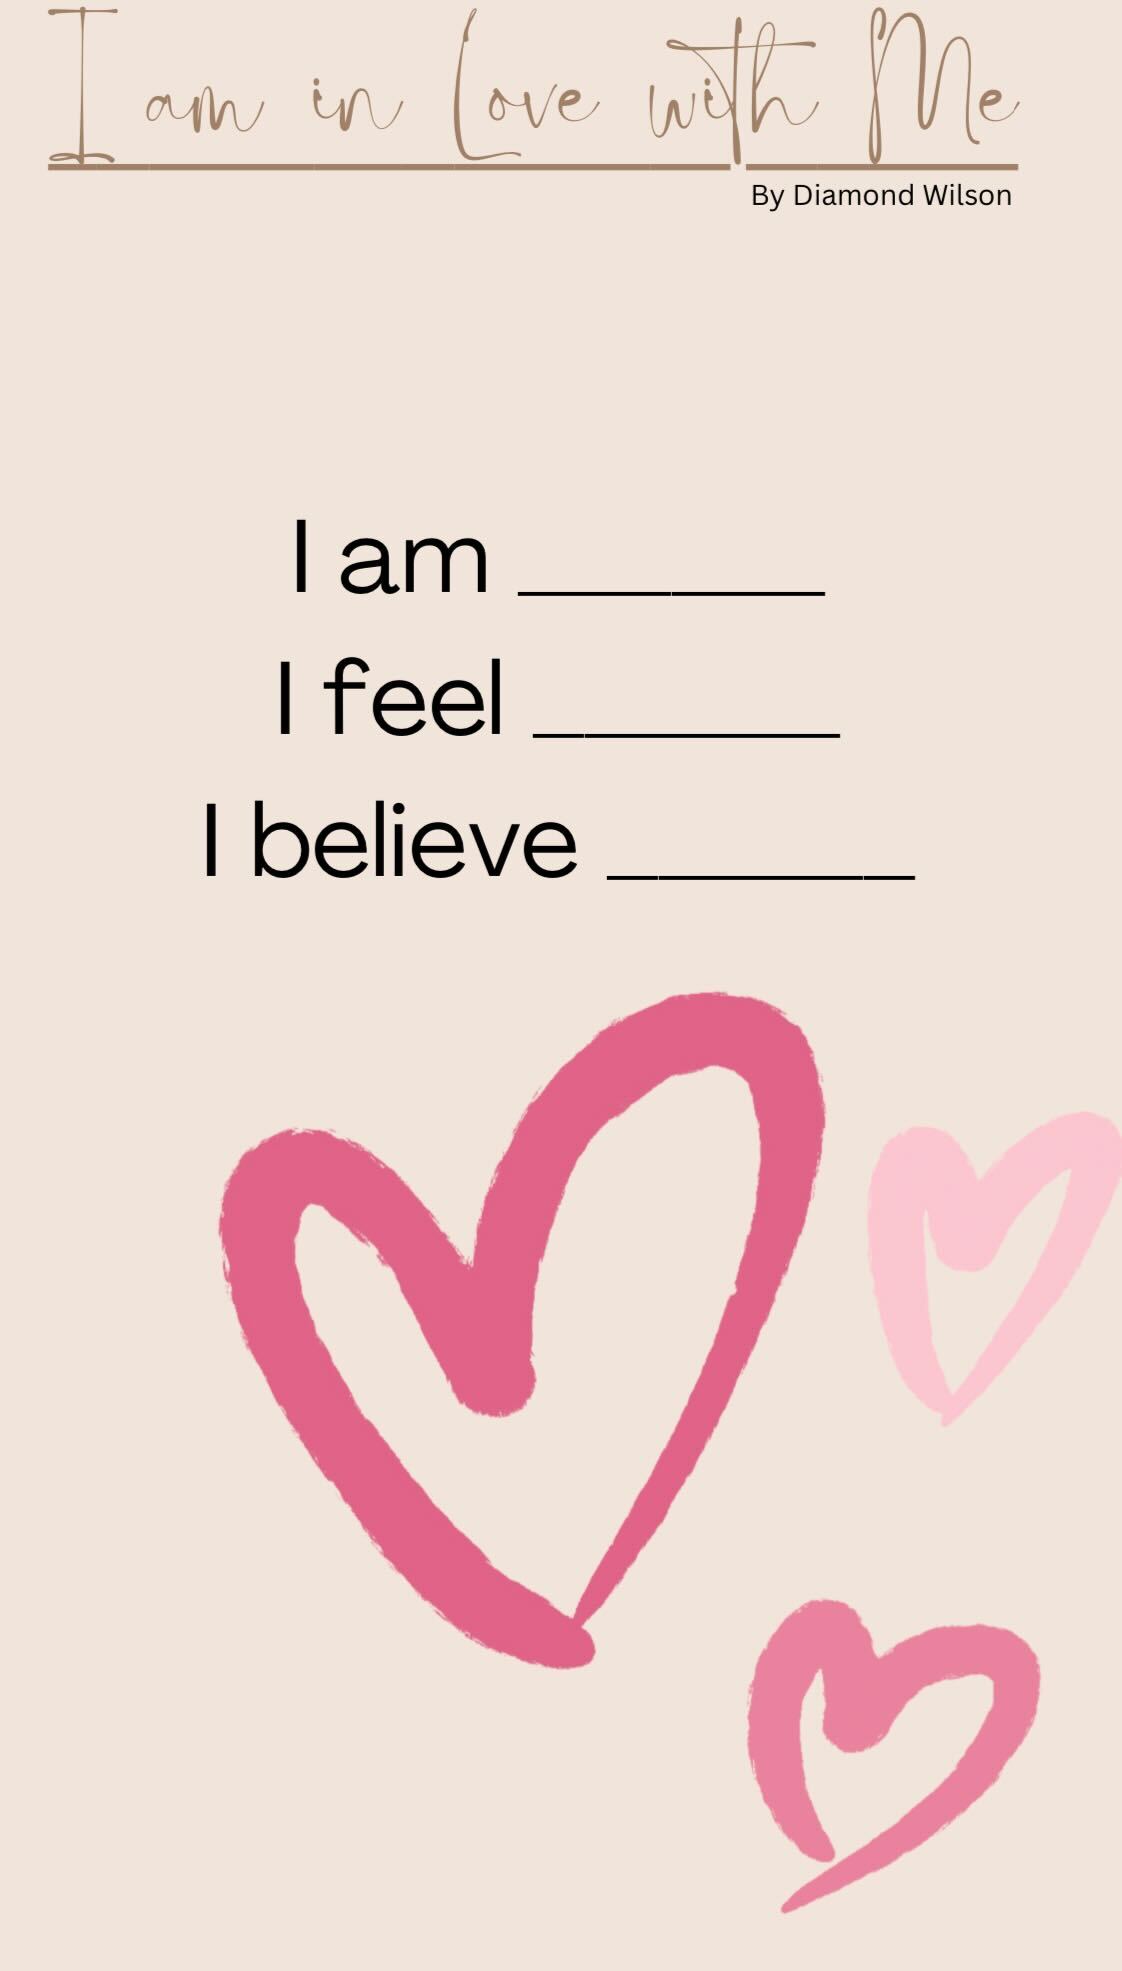 *Beige background with three pink and light pink hearts. Brown text overlay states: “I am in love with Me”. Black text overlay states: “By: Diamond Wilson I am (space to fill in the blank), I feel (space to fill in the blank), I believe (space to feel in the blank”*